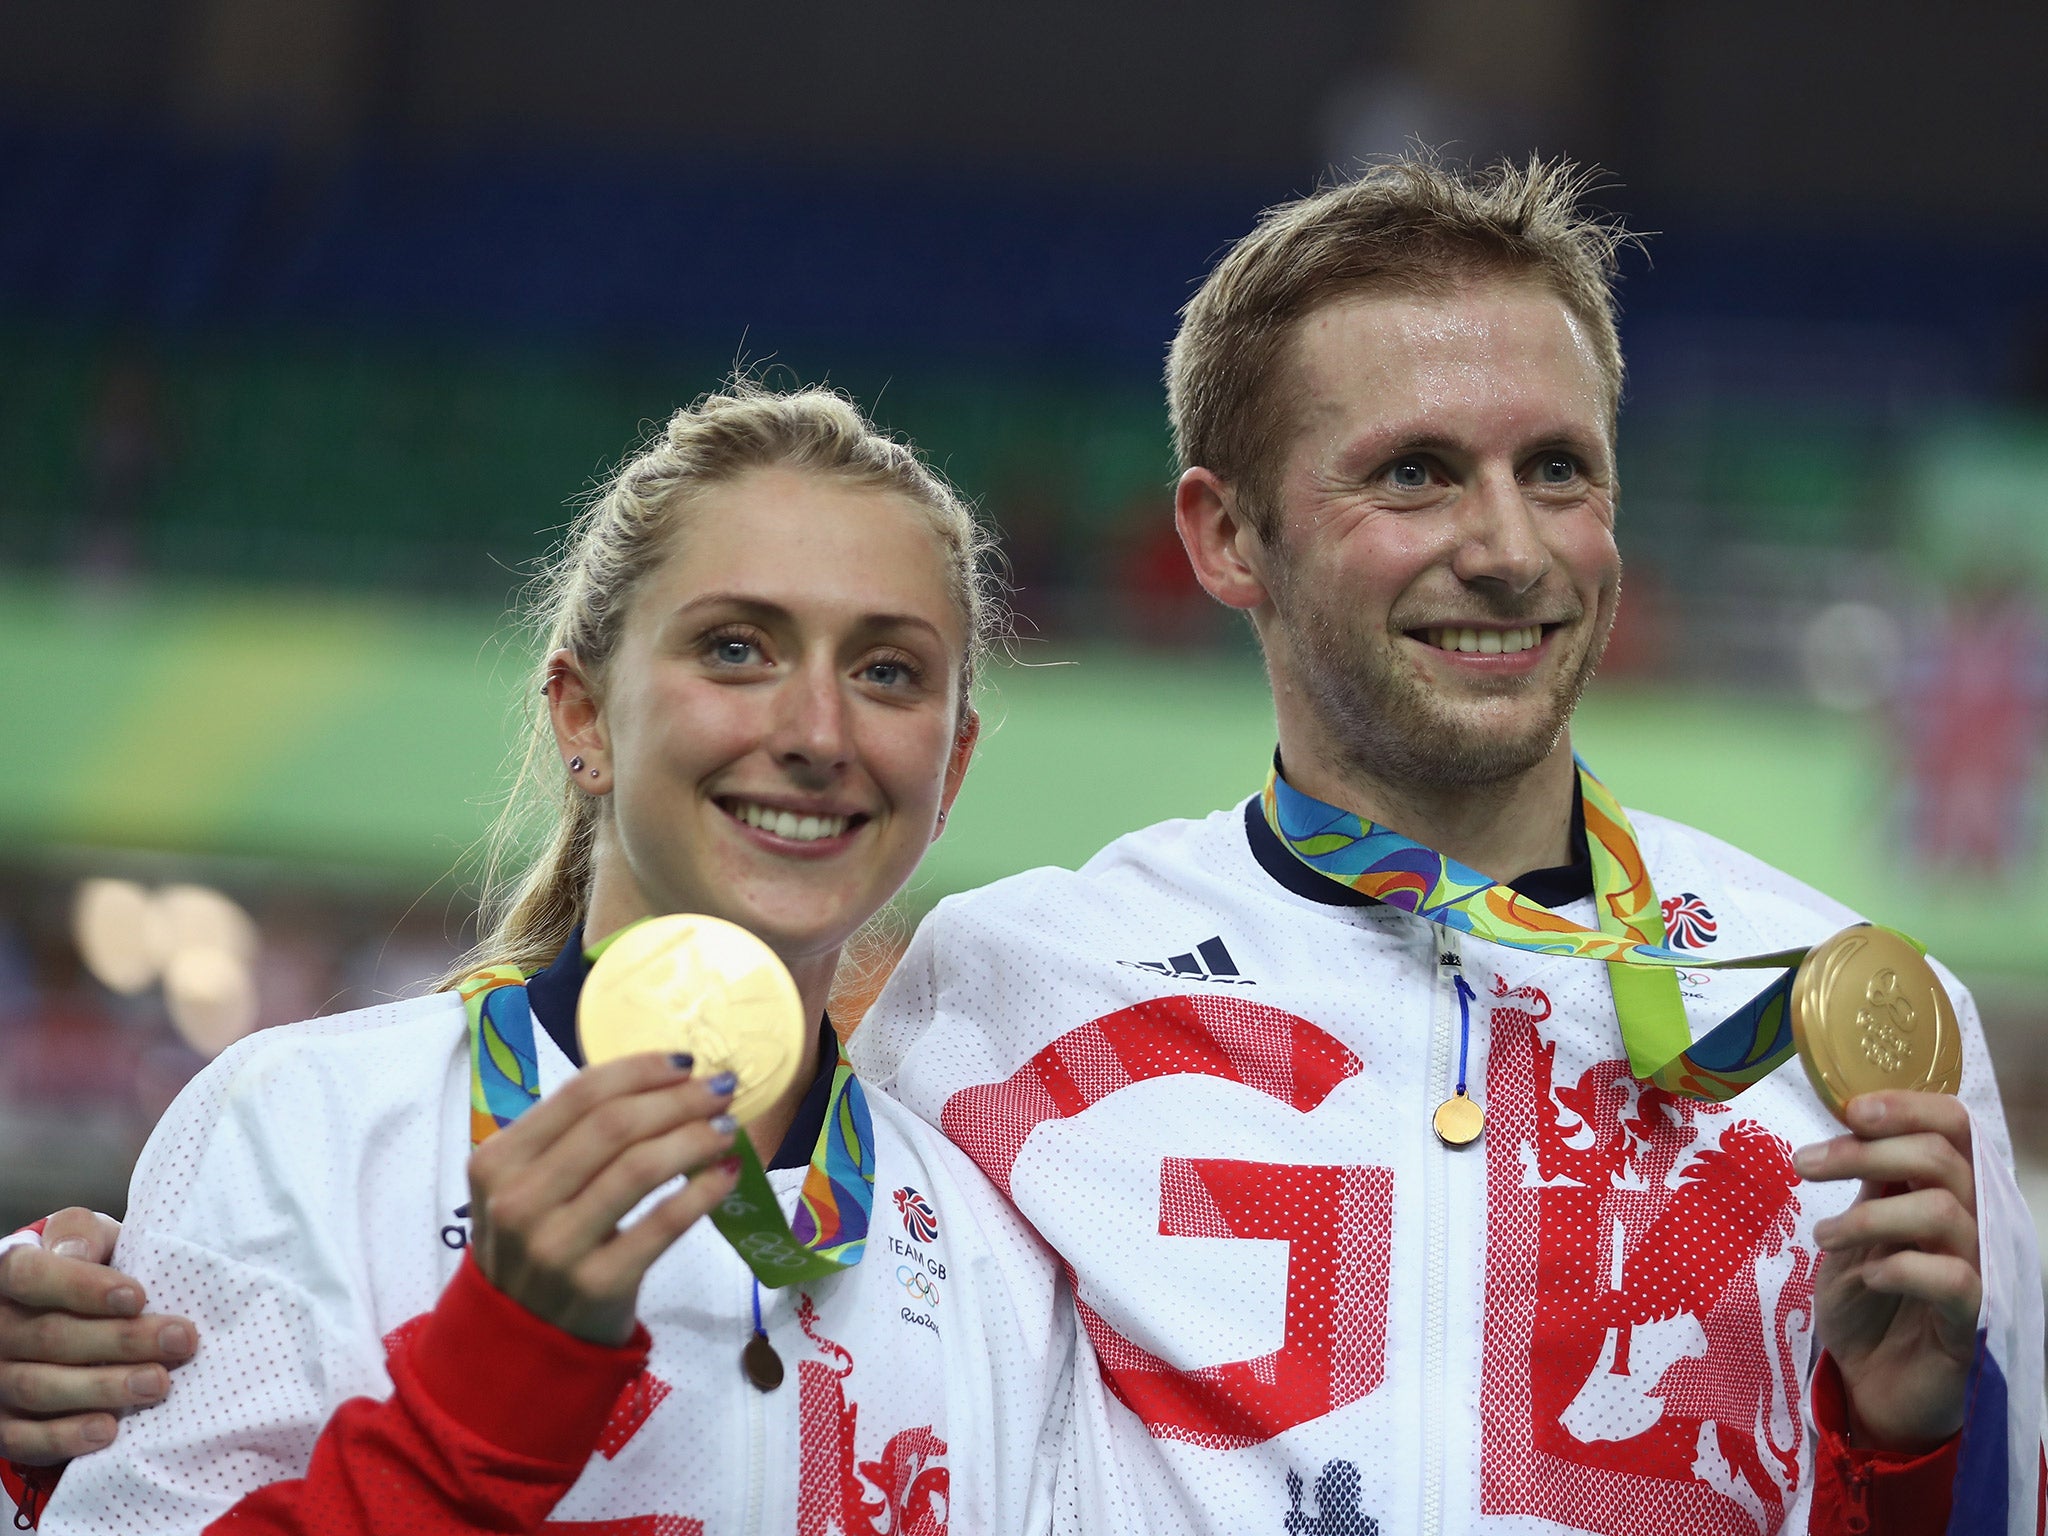 Laura Trott, alongside Jason Kenny, admits she is 'annoyed and frustrated' by allegations against Team GB's cyclists